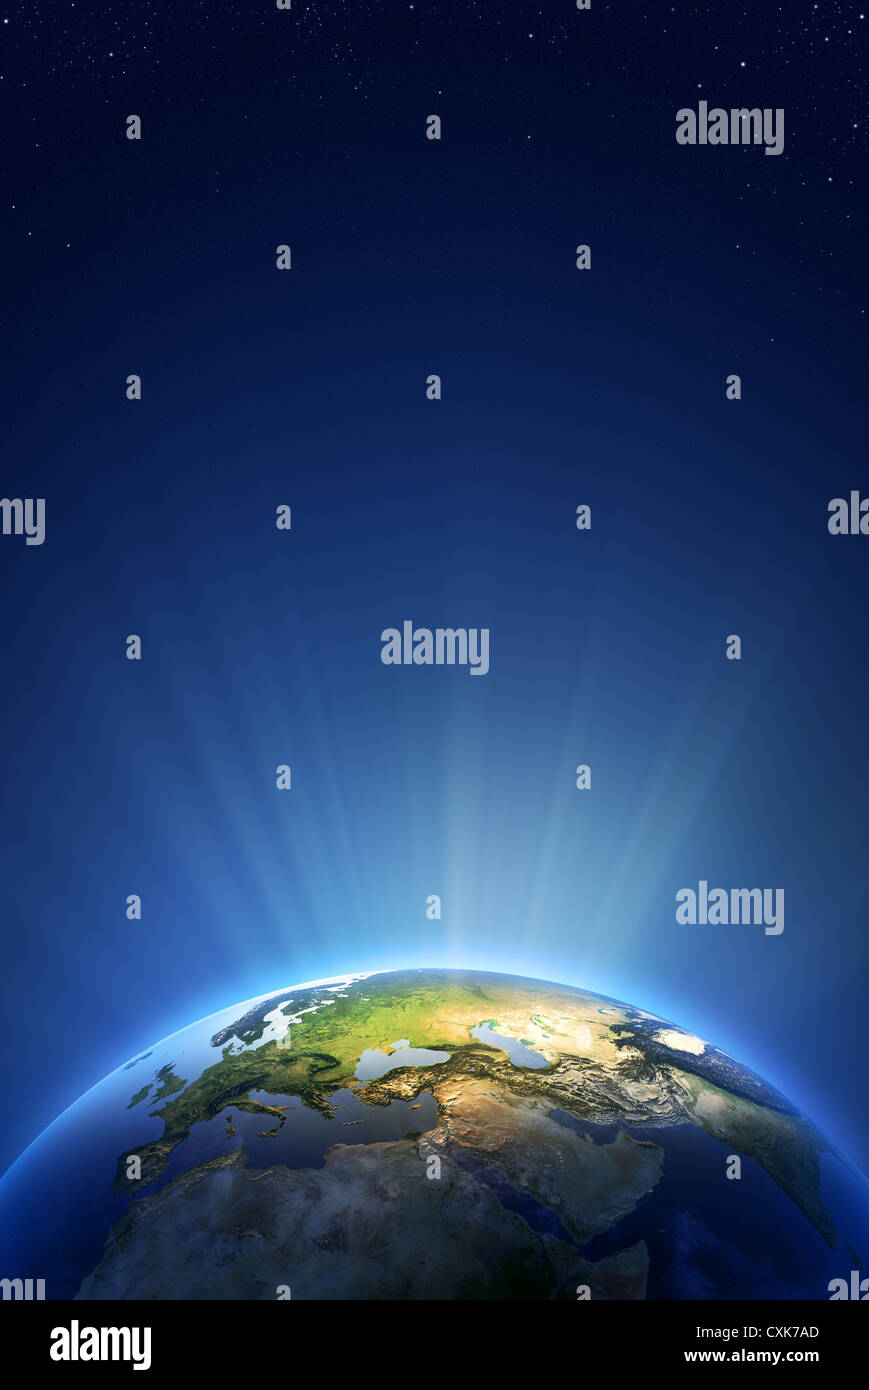 Earth Radiant Light Series - Europe (Elements of this image furnished by NASA- earthmap http://visibleearth.nasa.gov) Stock Photo